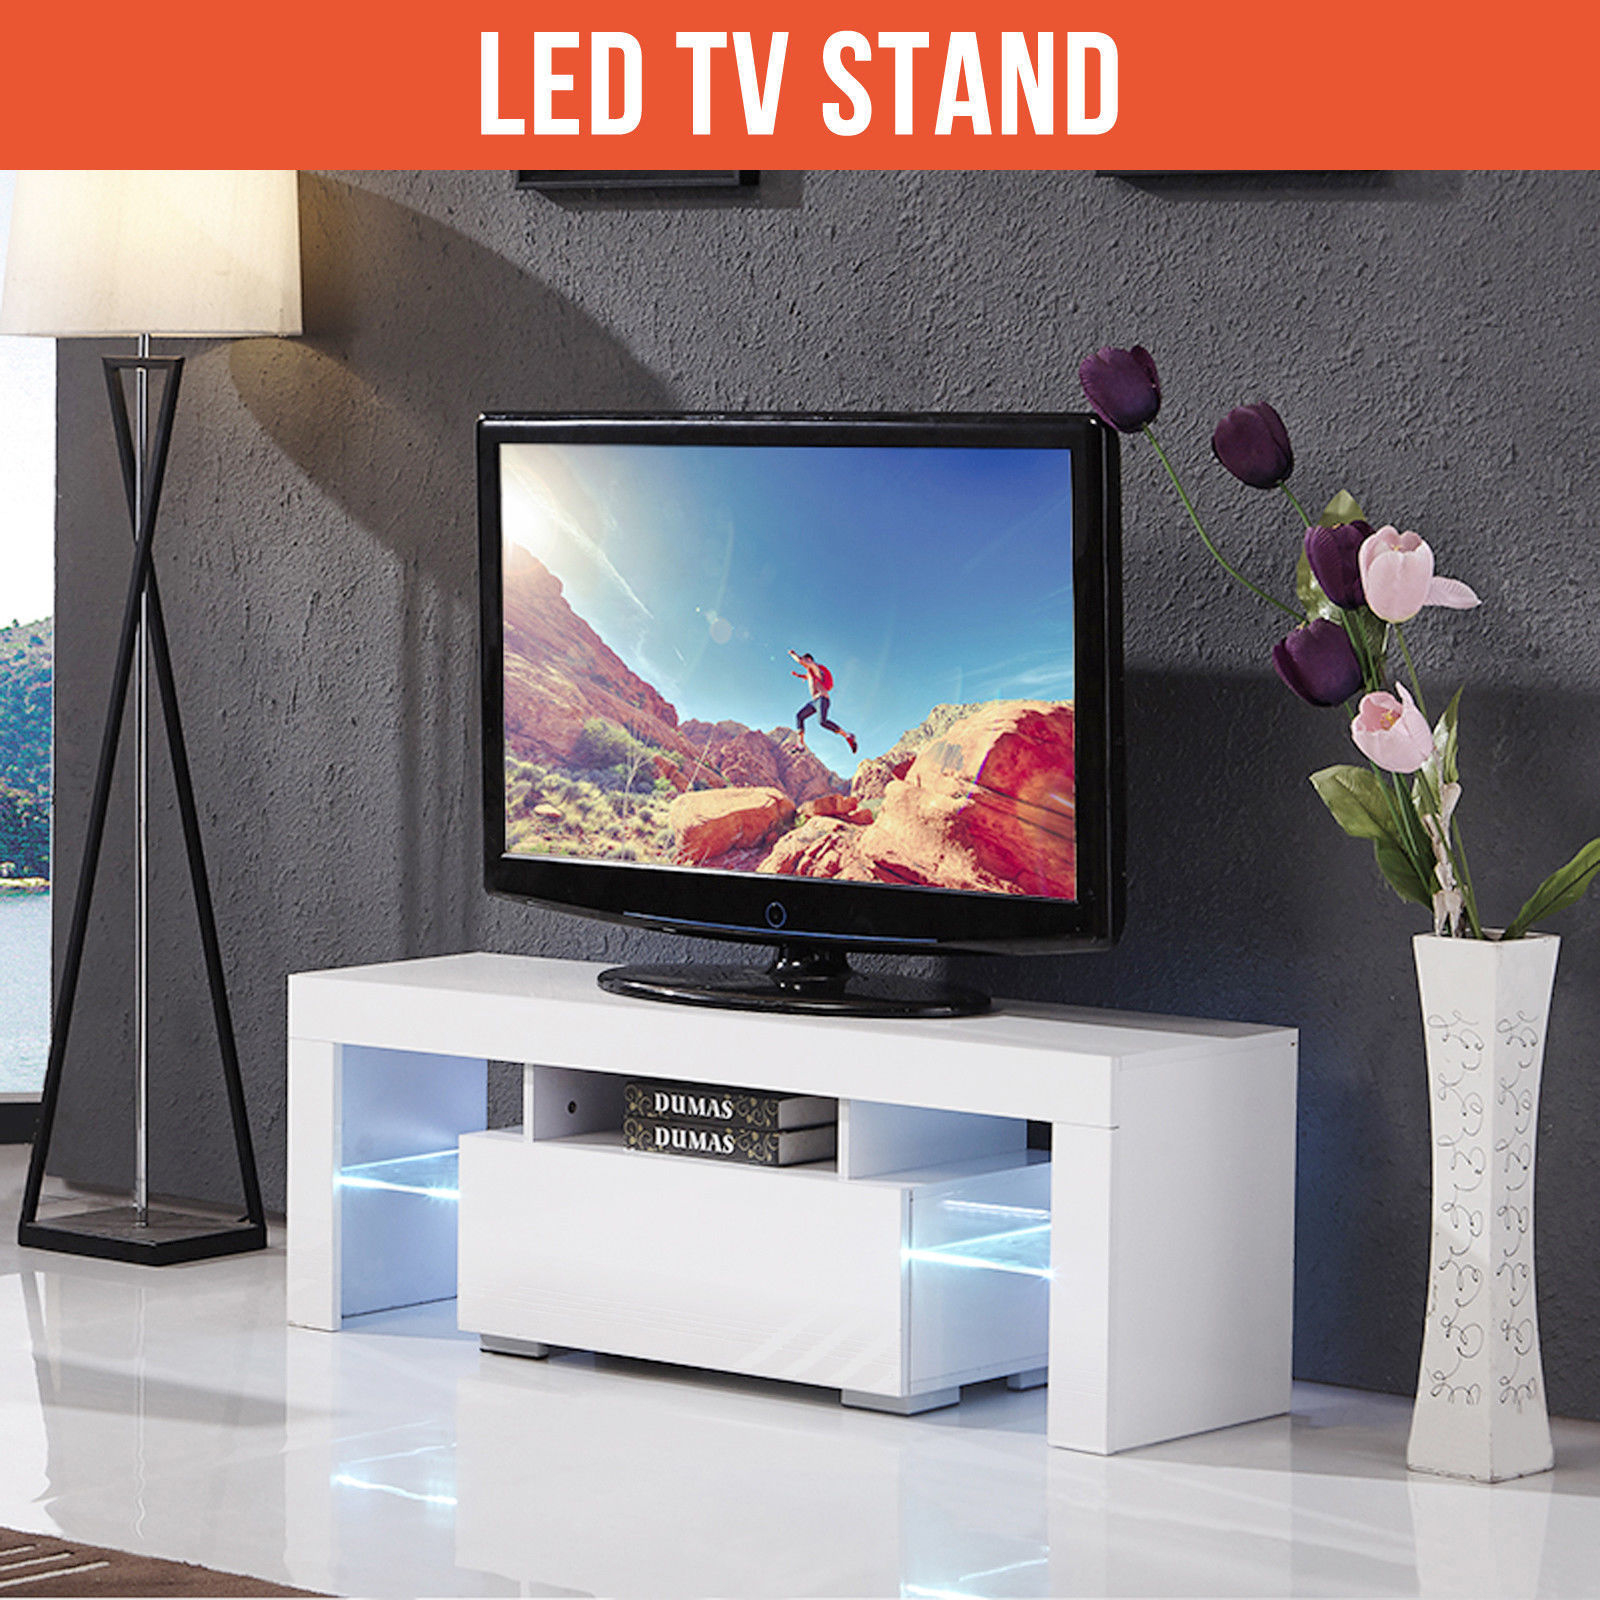 Senvoziii LED TV Stand White High Gloss Sideboard TV Cabinet Entertainment with 3 Doors and Glass Shelves for Living Room Furniture